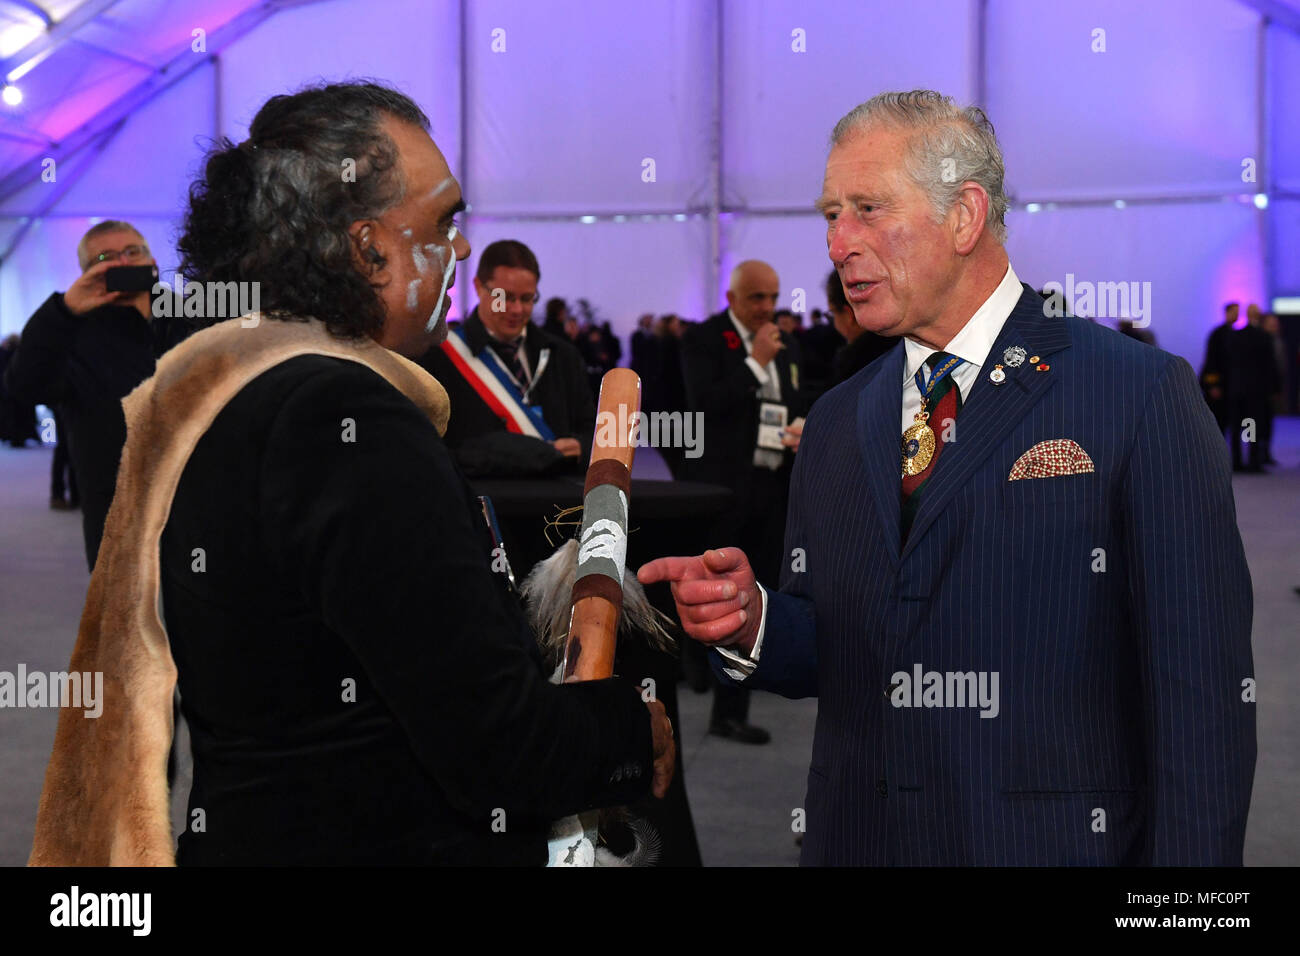 The Prince of Wales meets indigenous didgeridoo player David Dahwurr Hudson after an early morning memorial at the Villers-Bretonneux Memorial in France, to mark the 100th anniversary of the Battle of Villers-Bretonneux. Stock Photo